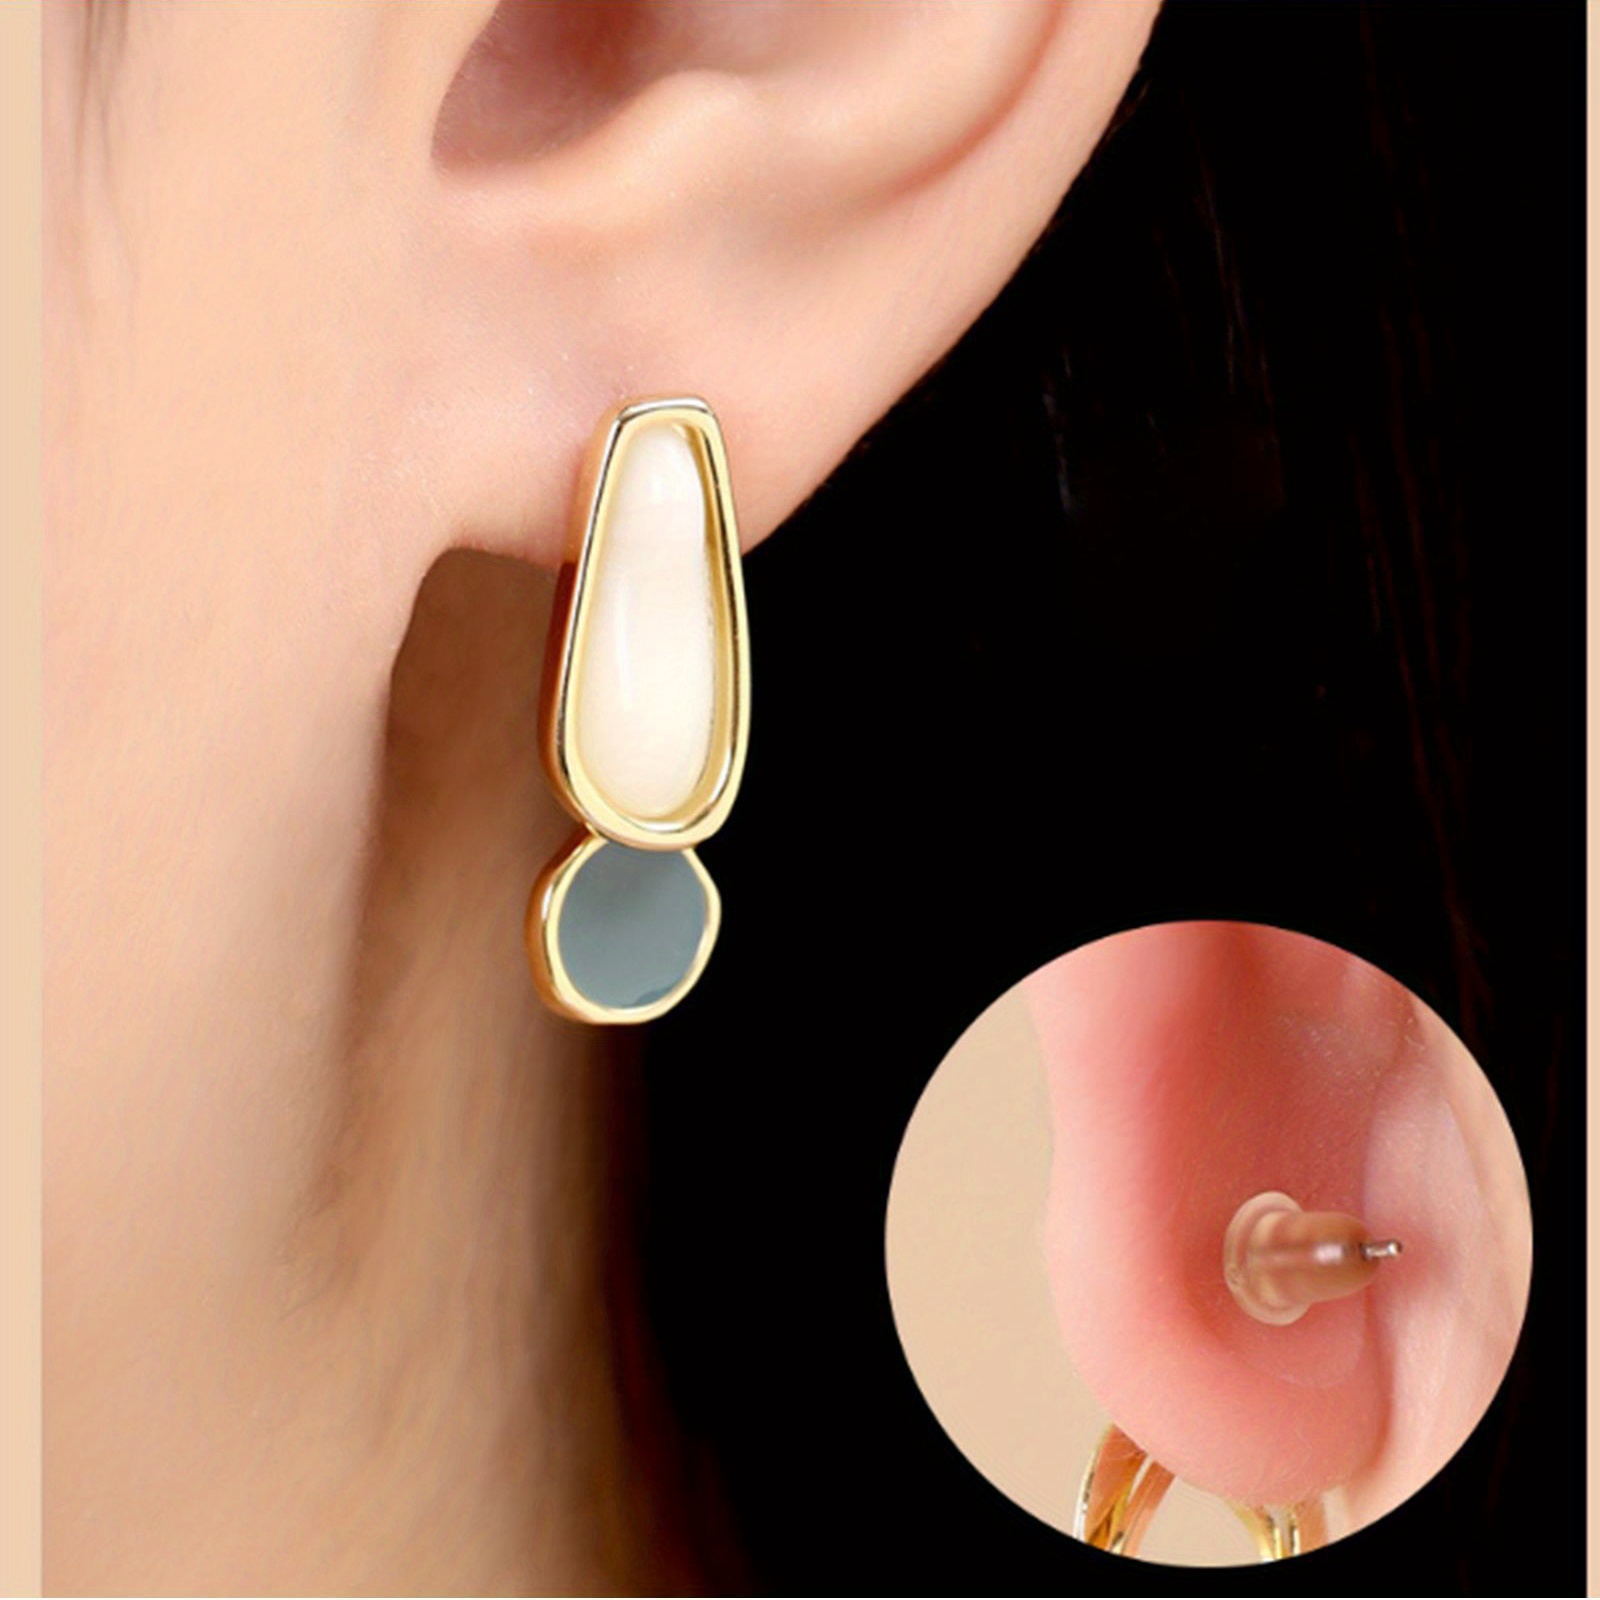 Buy earlobe support patches Online in South Africa at Low Prices at  desertcart